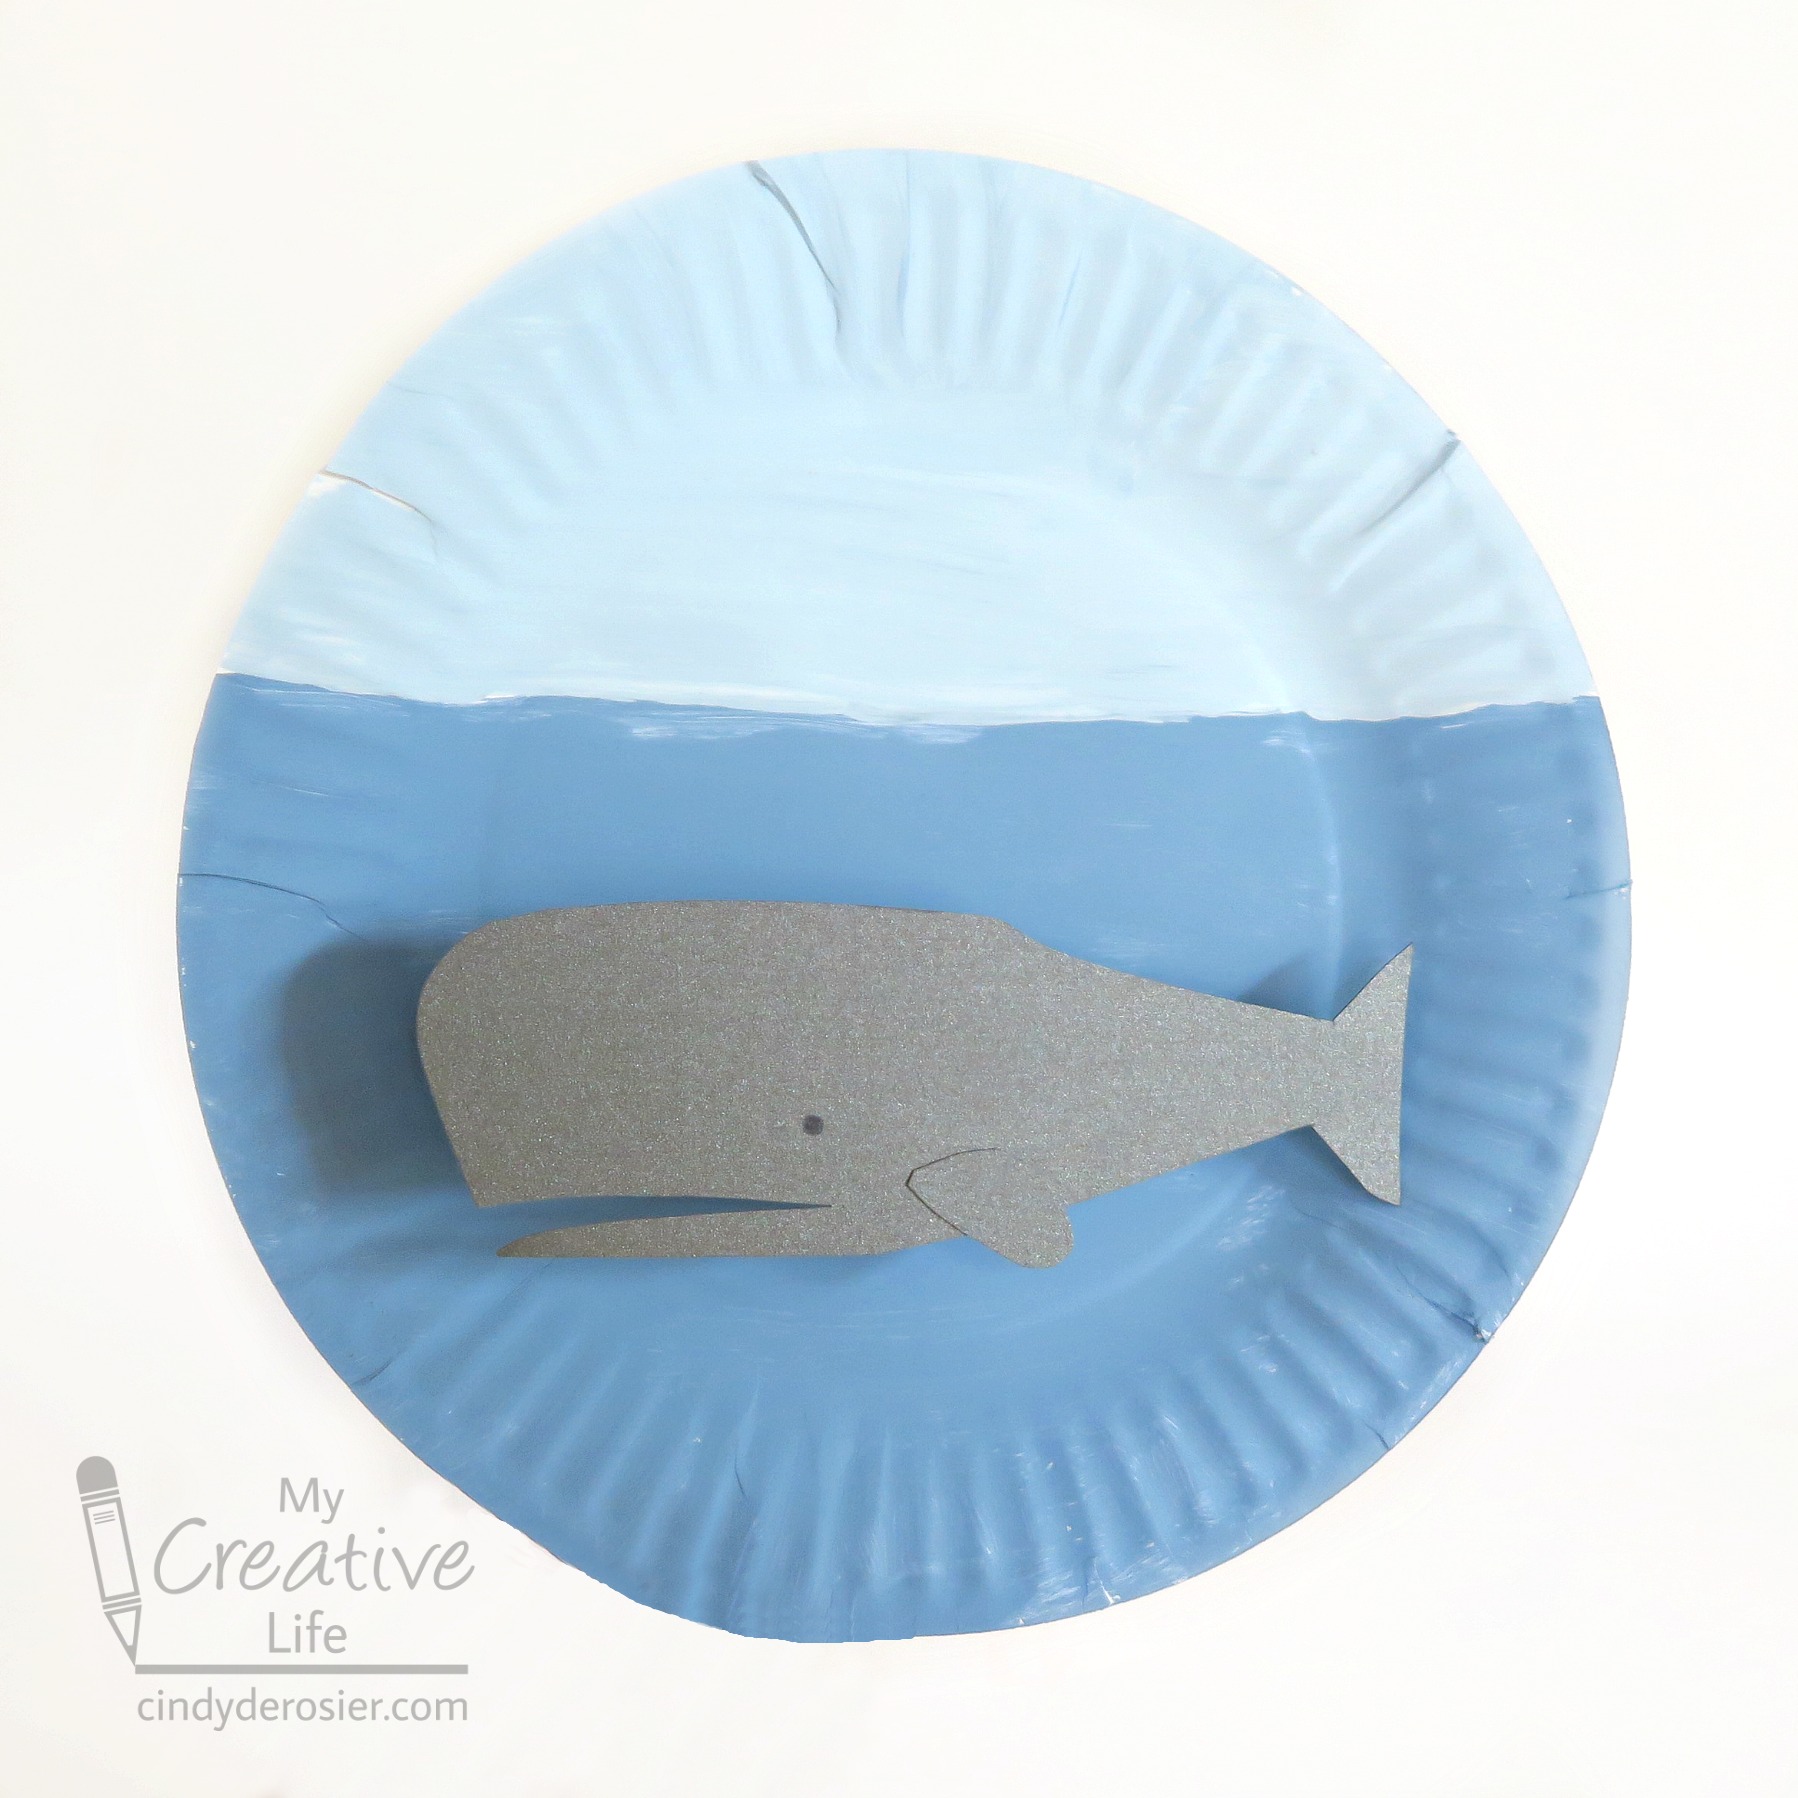 Blue Whale Paper Plate Craft - The Farmwife Crafts